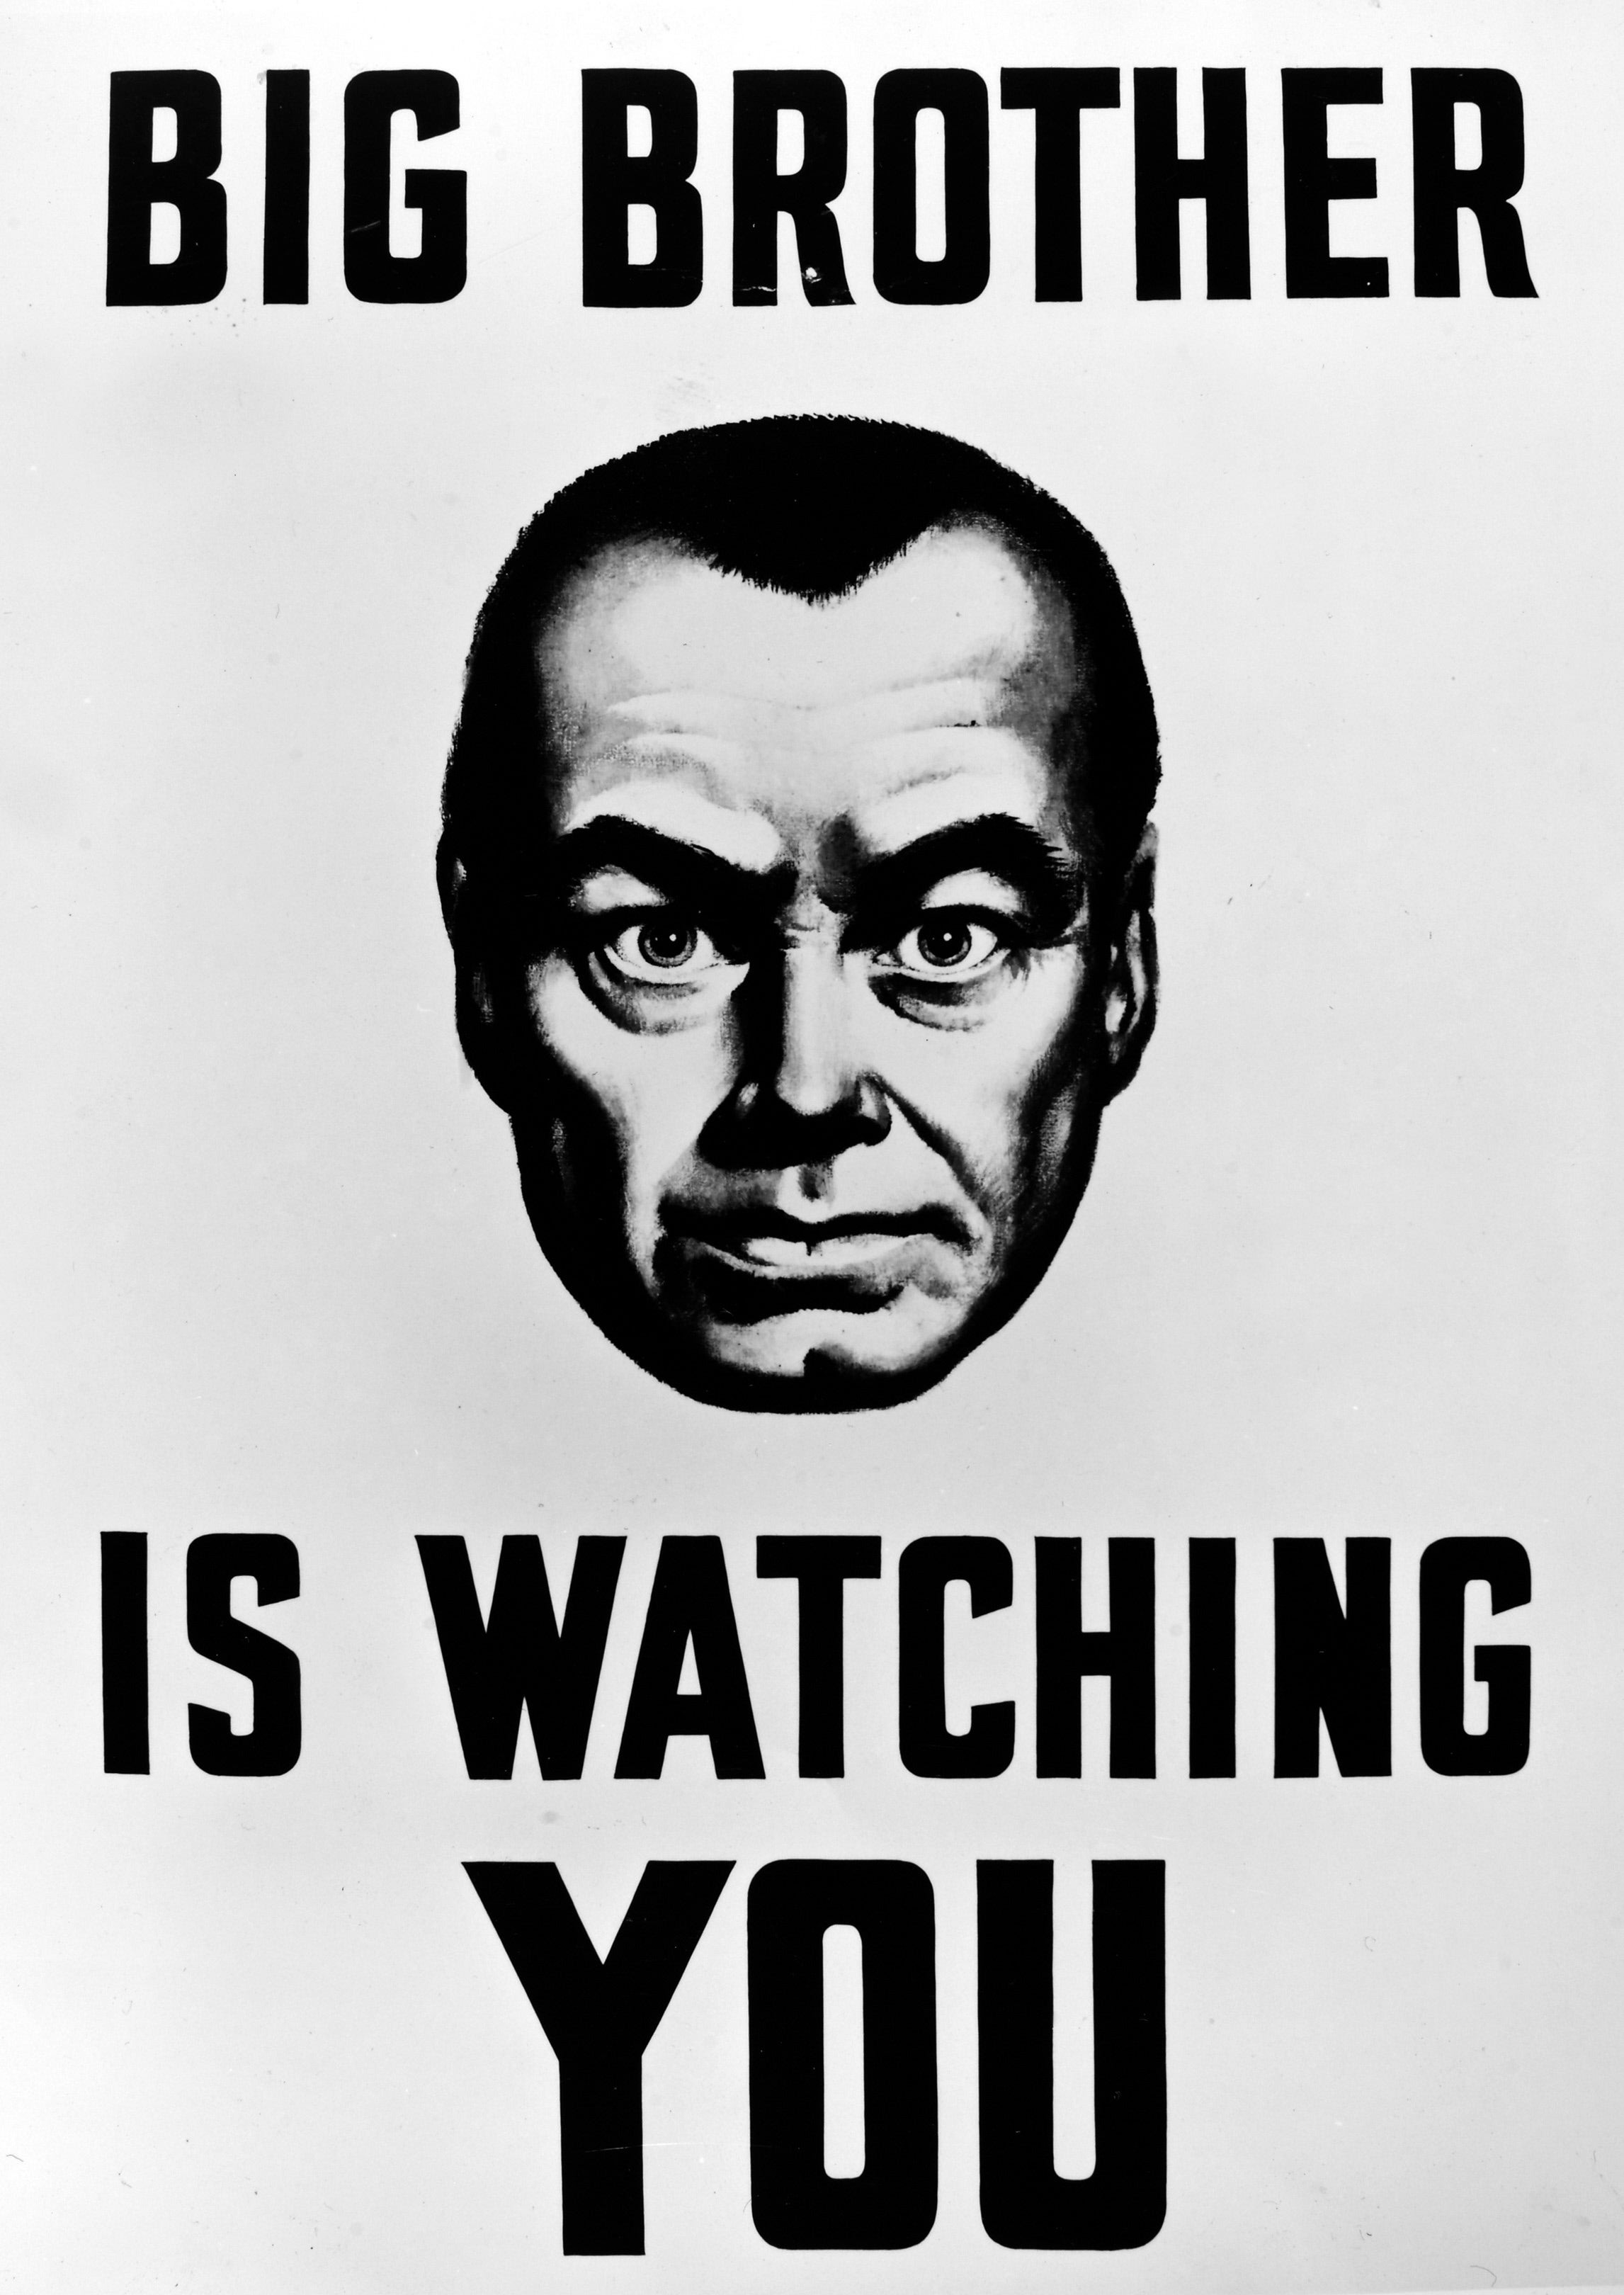 A still from the 1956 film adaptation of Orwell’s novel, '1984'